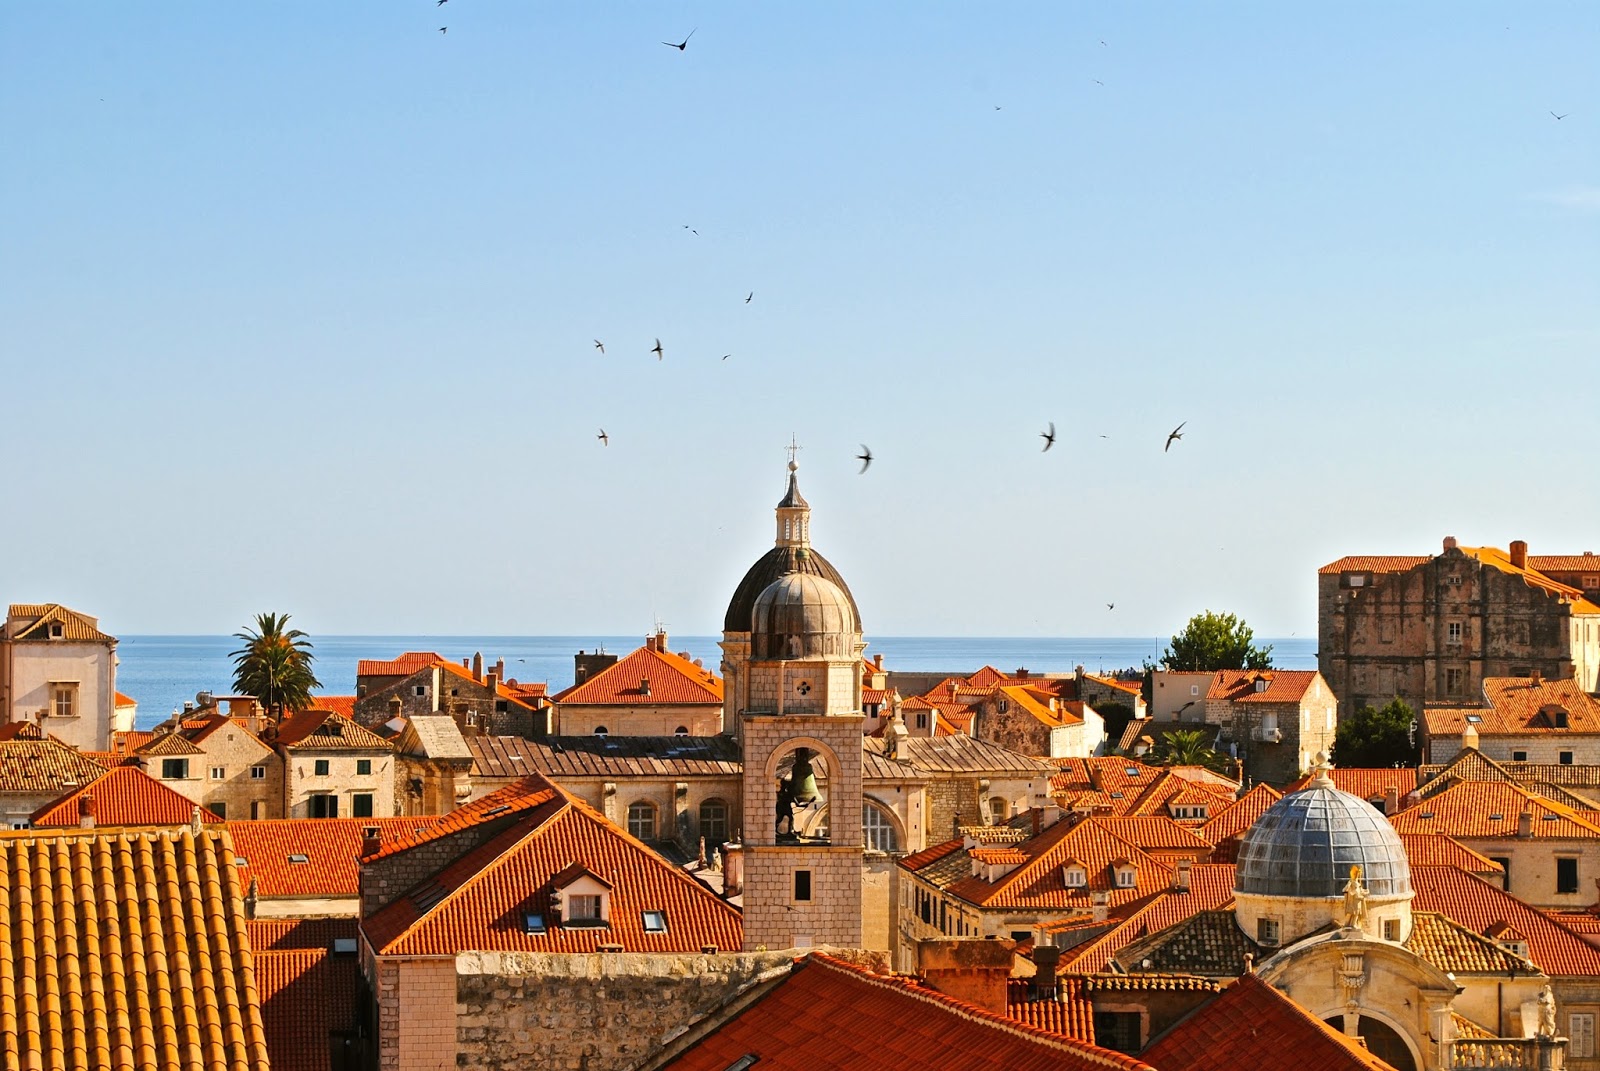 5 things to do in Dubrovnik : Walking the Old Town Walls